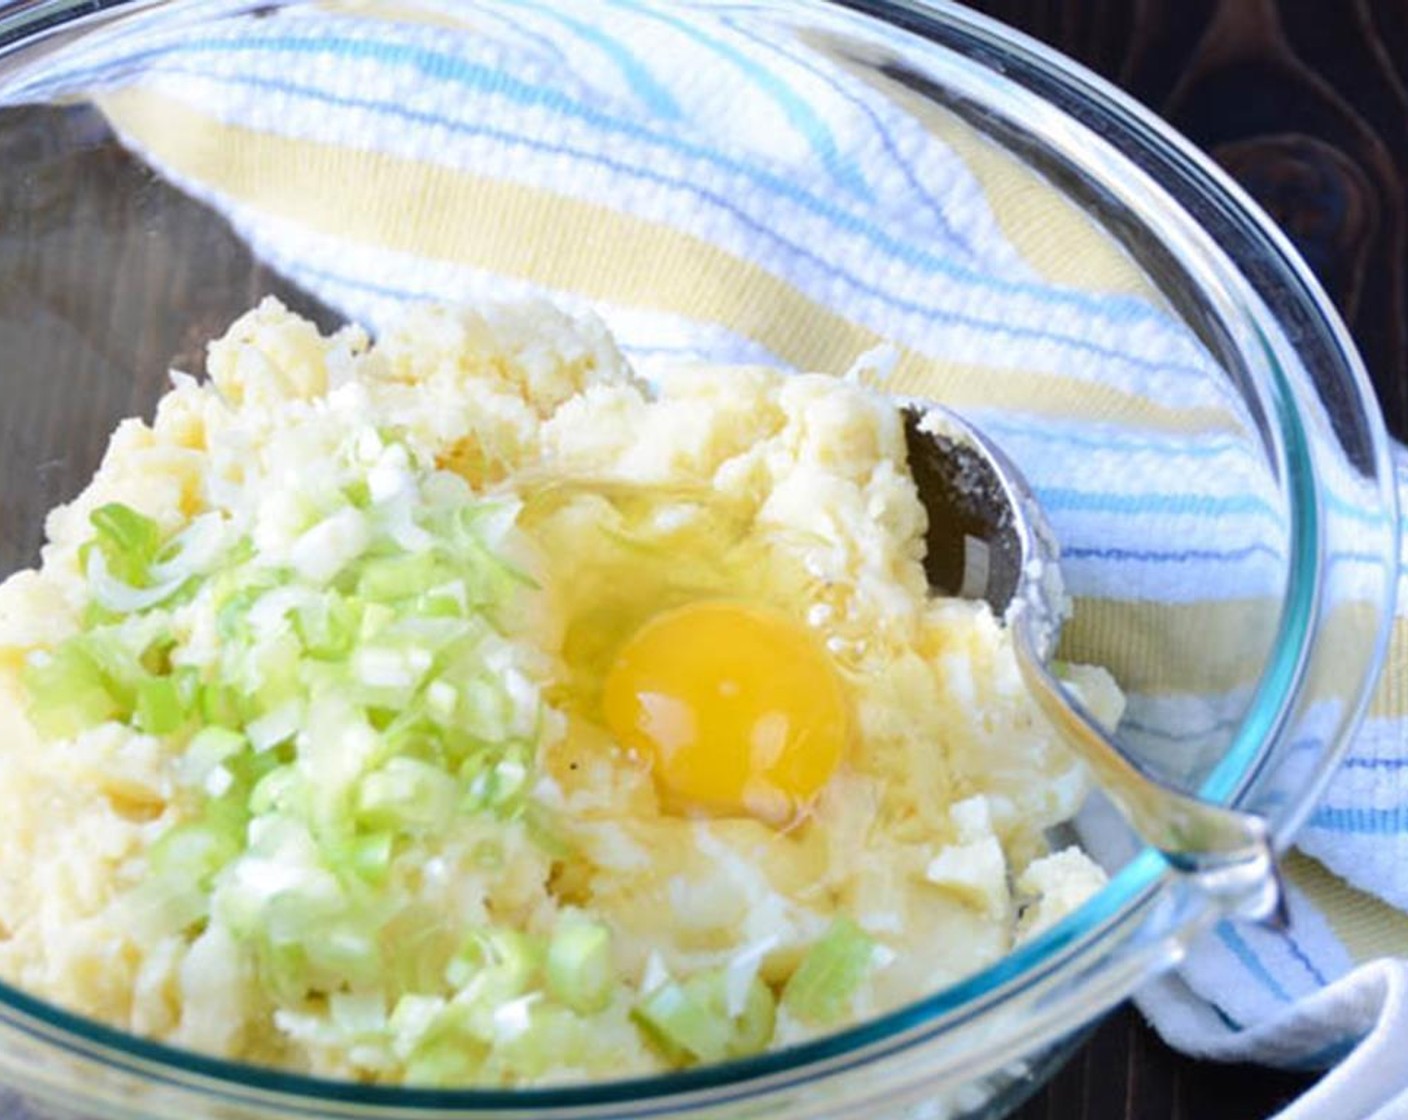 step 2 In a large bowl, combine the Mashed Potatoes (3 cups), Scallion (1 bunch),  Egg (1), Milk (1/3 cup), and Blue Cheese (2/3 cup). Stir until well combined.